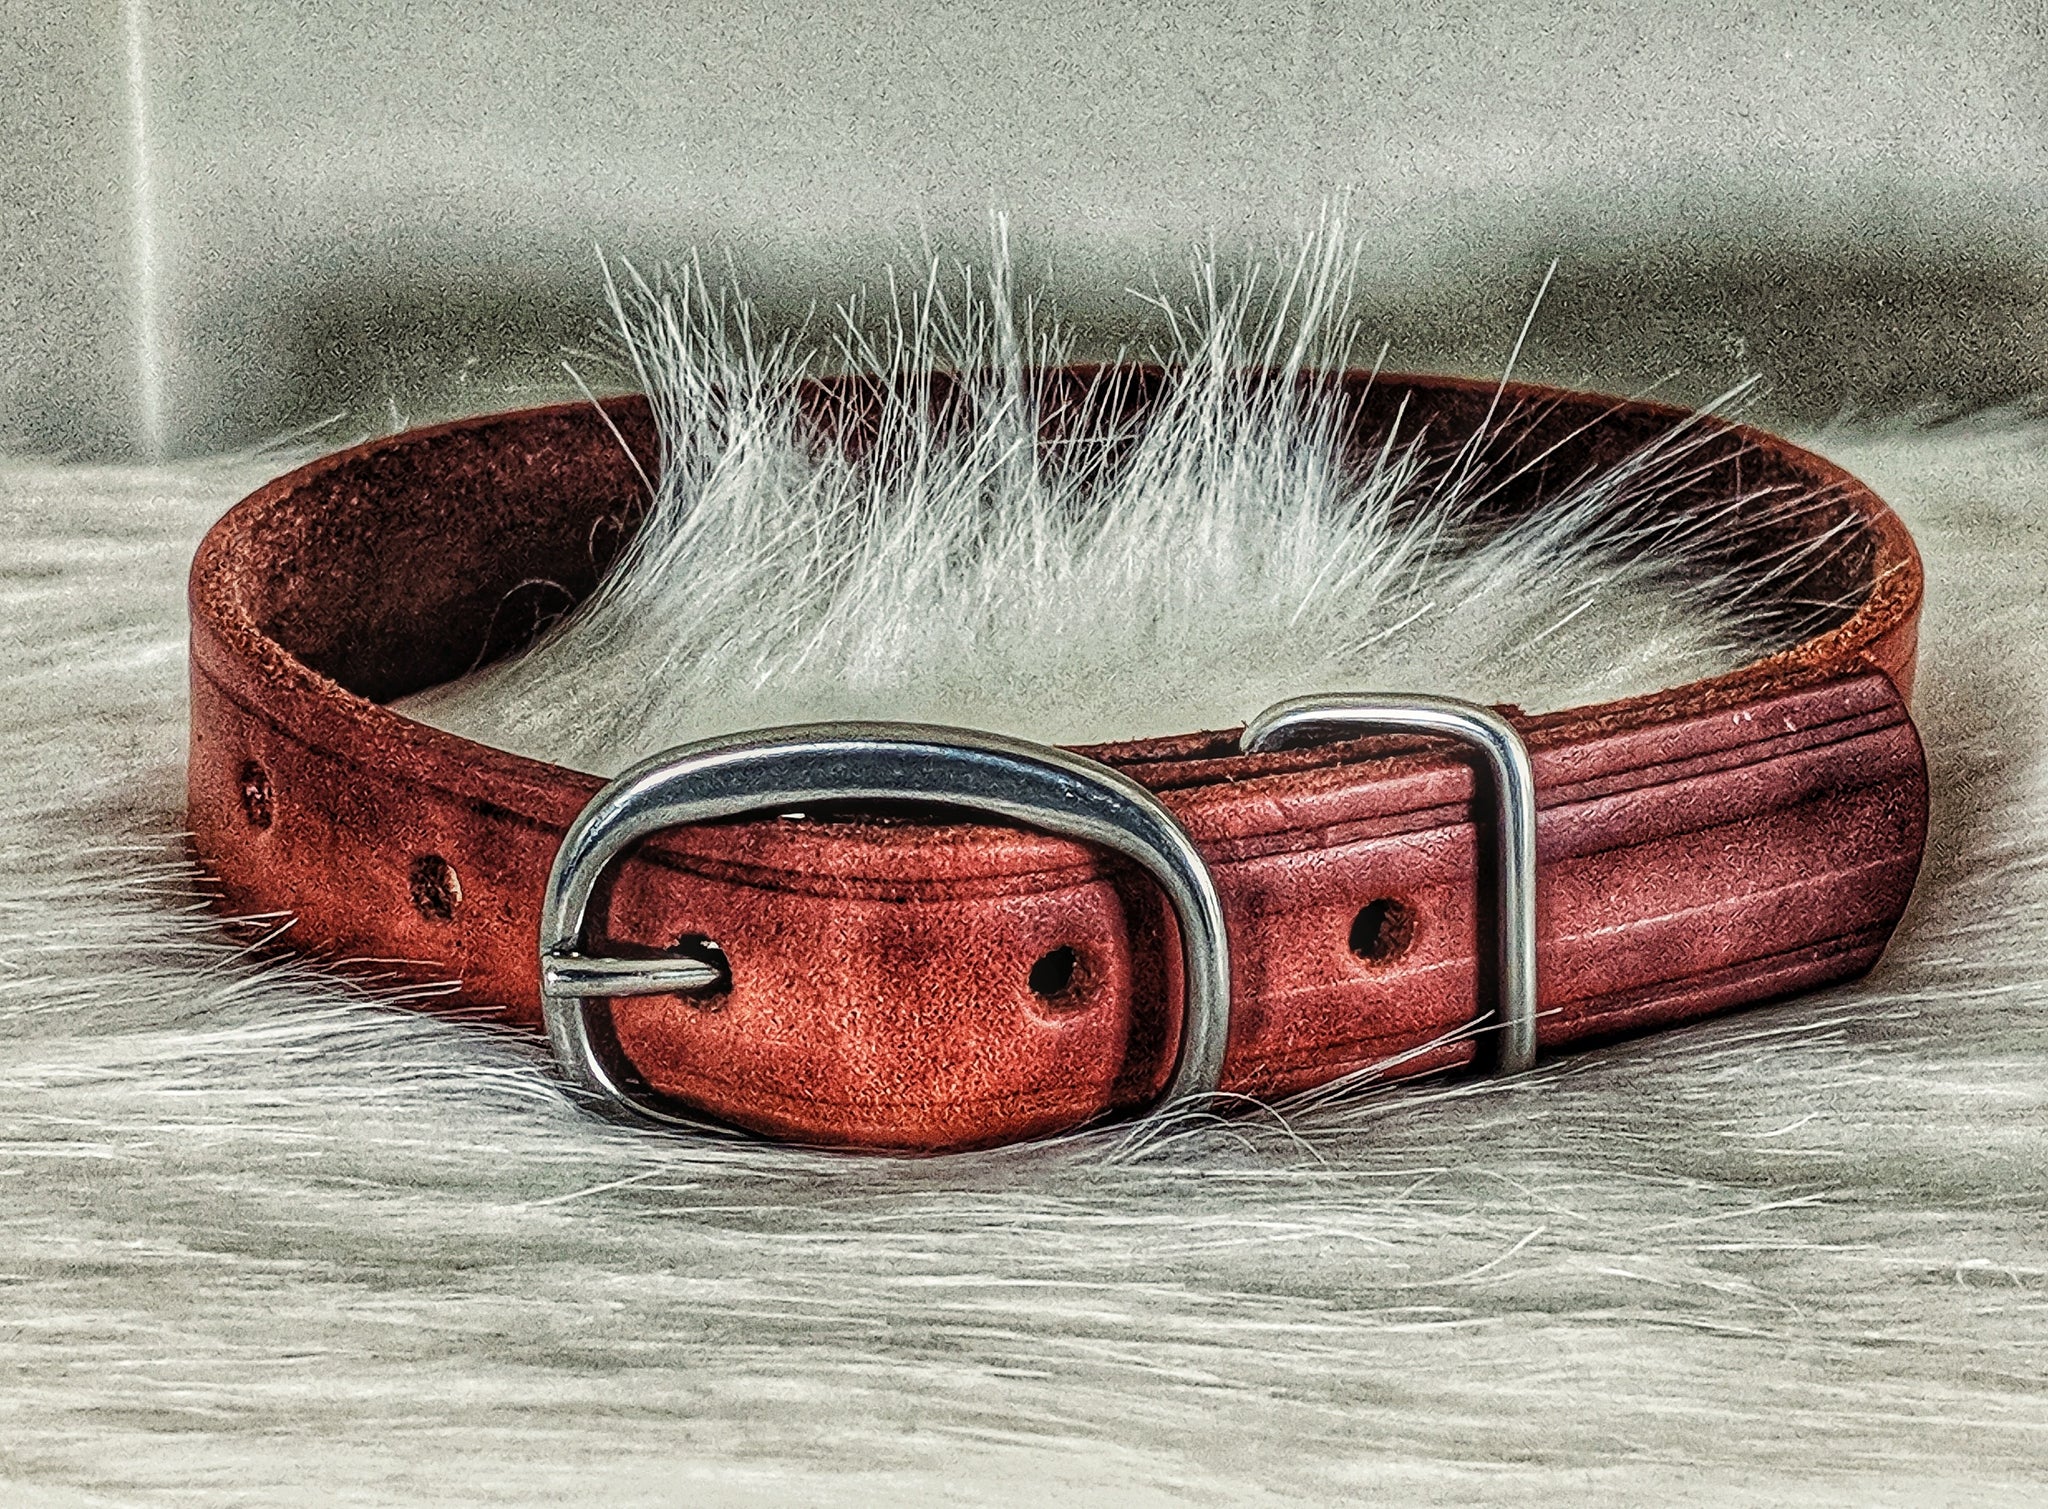 Upcycled horse Hobble Straps leather dog collar - Montana Select Premium Pet Products.